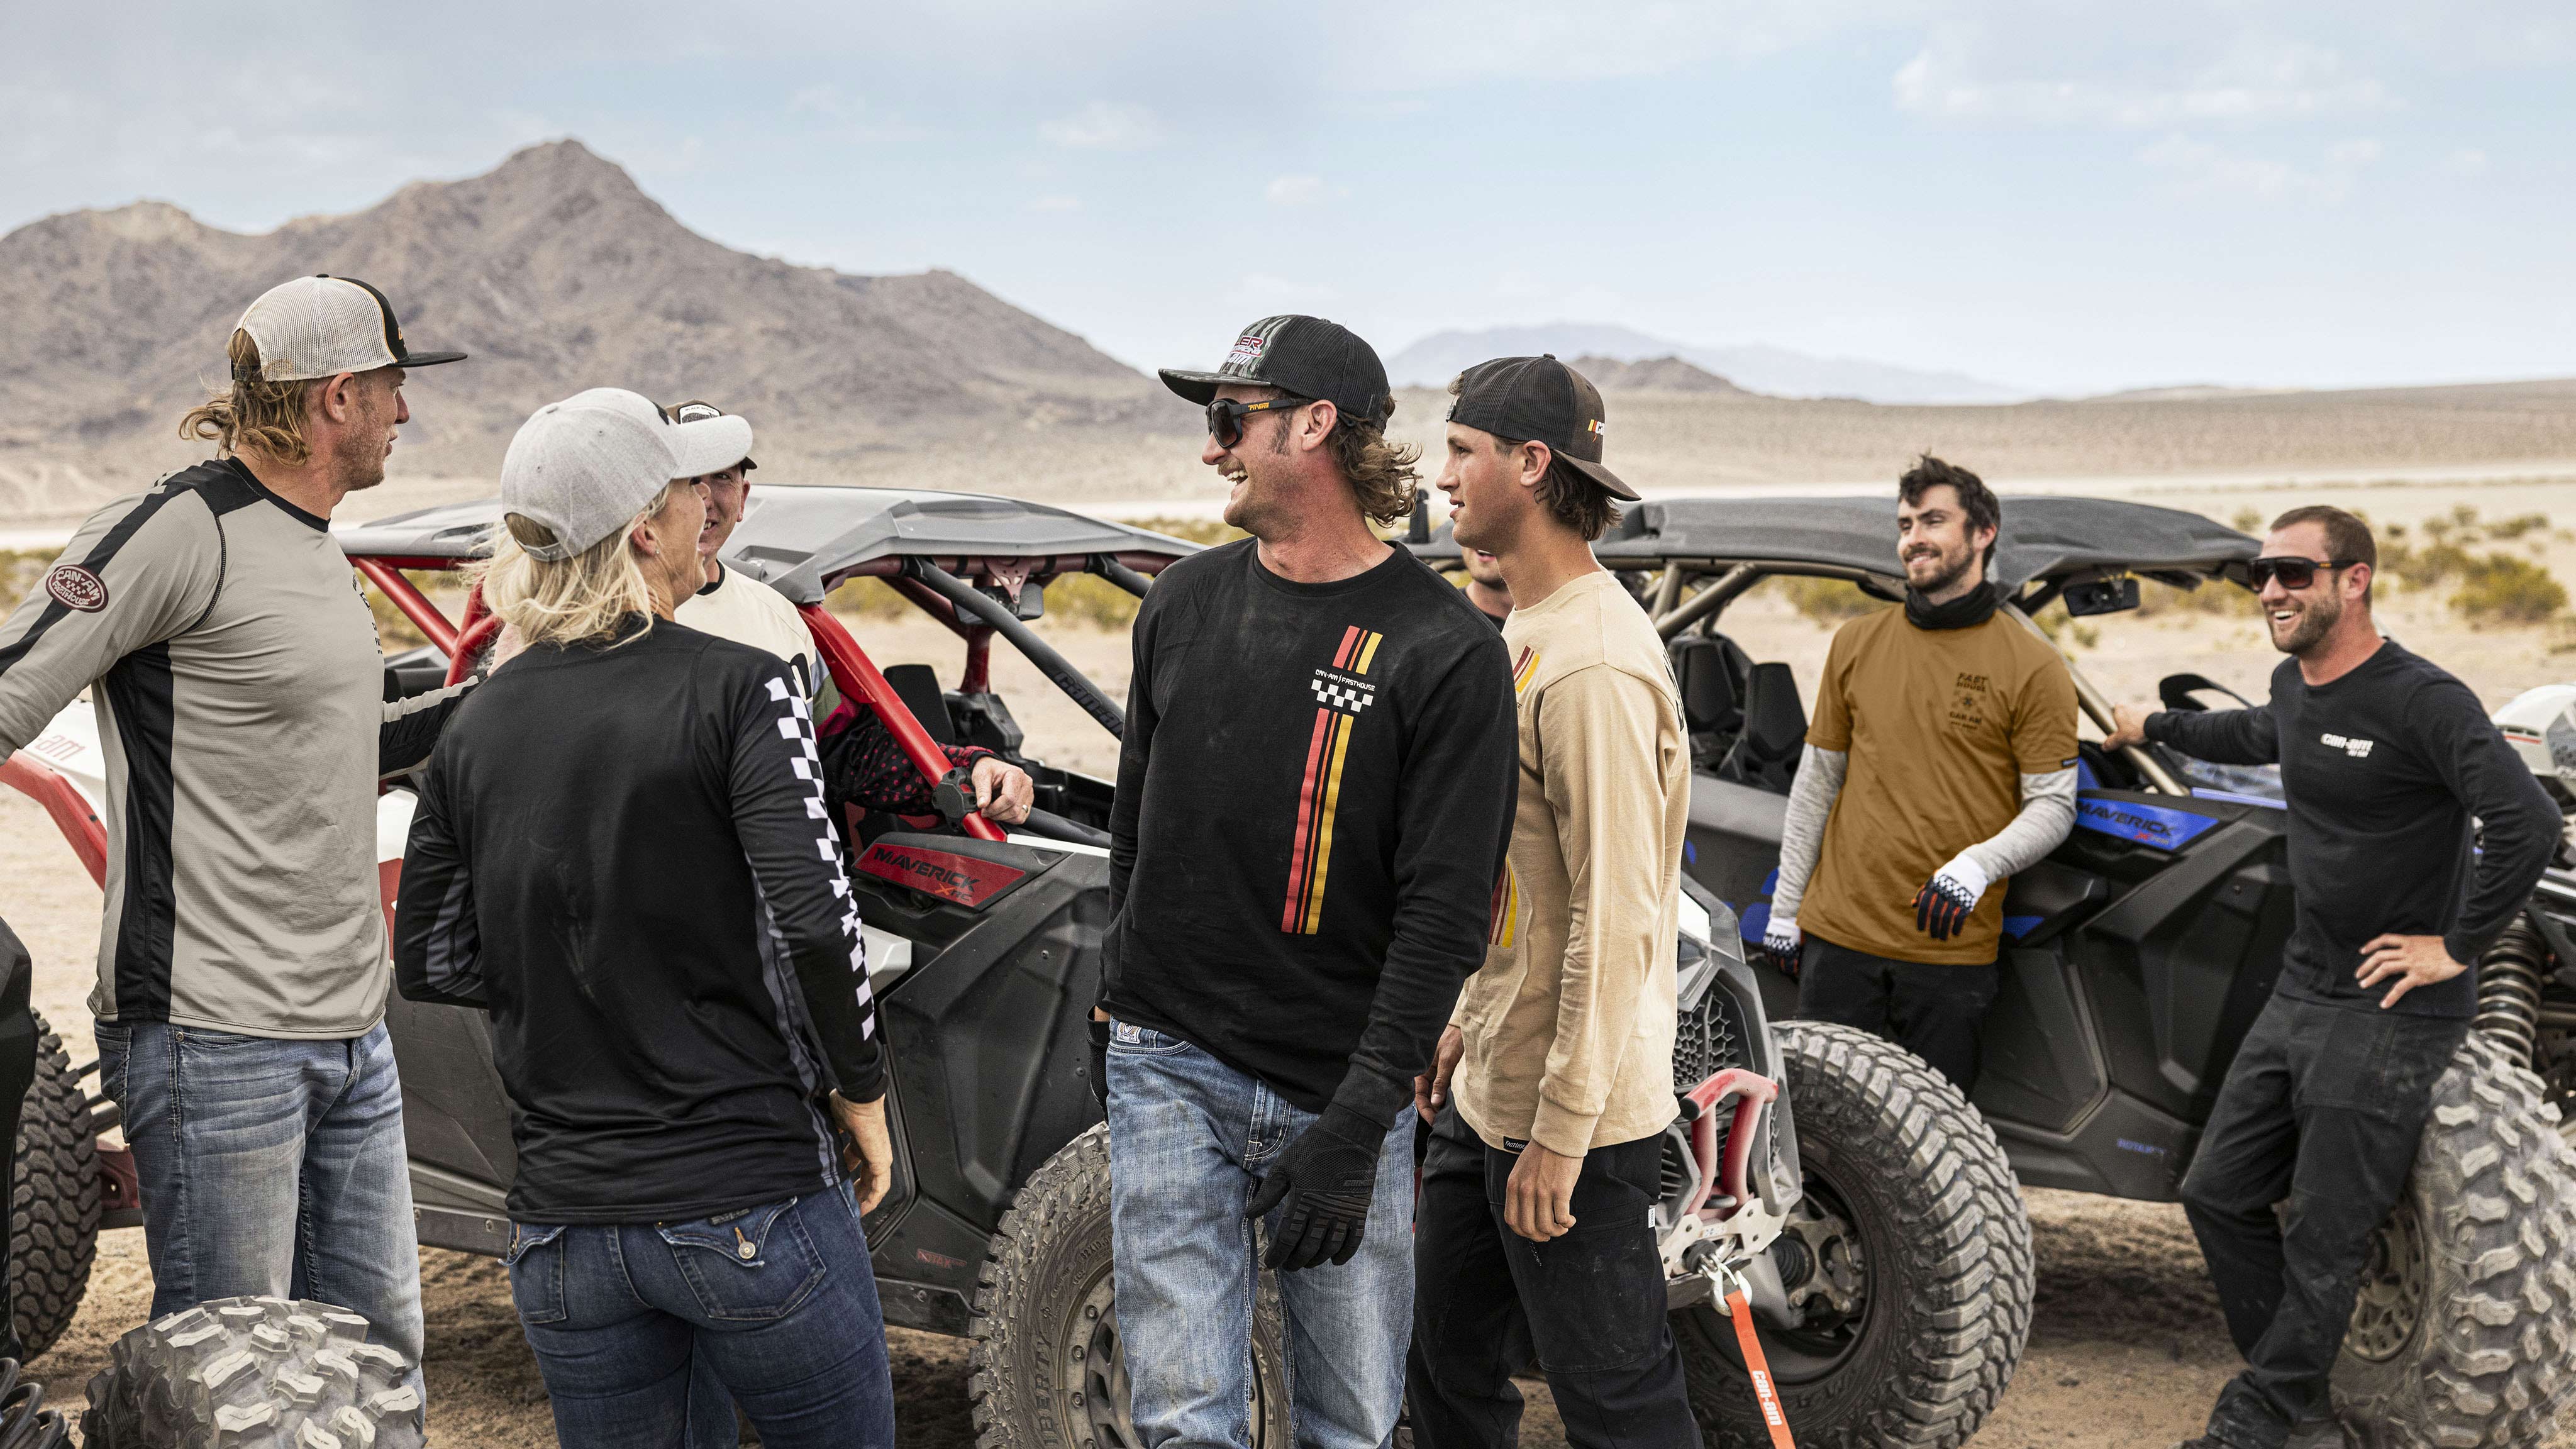 Outdoor enthusiasts discussing next to Can-Am SxS vehicles